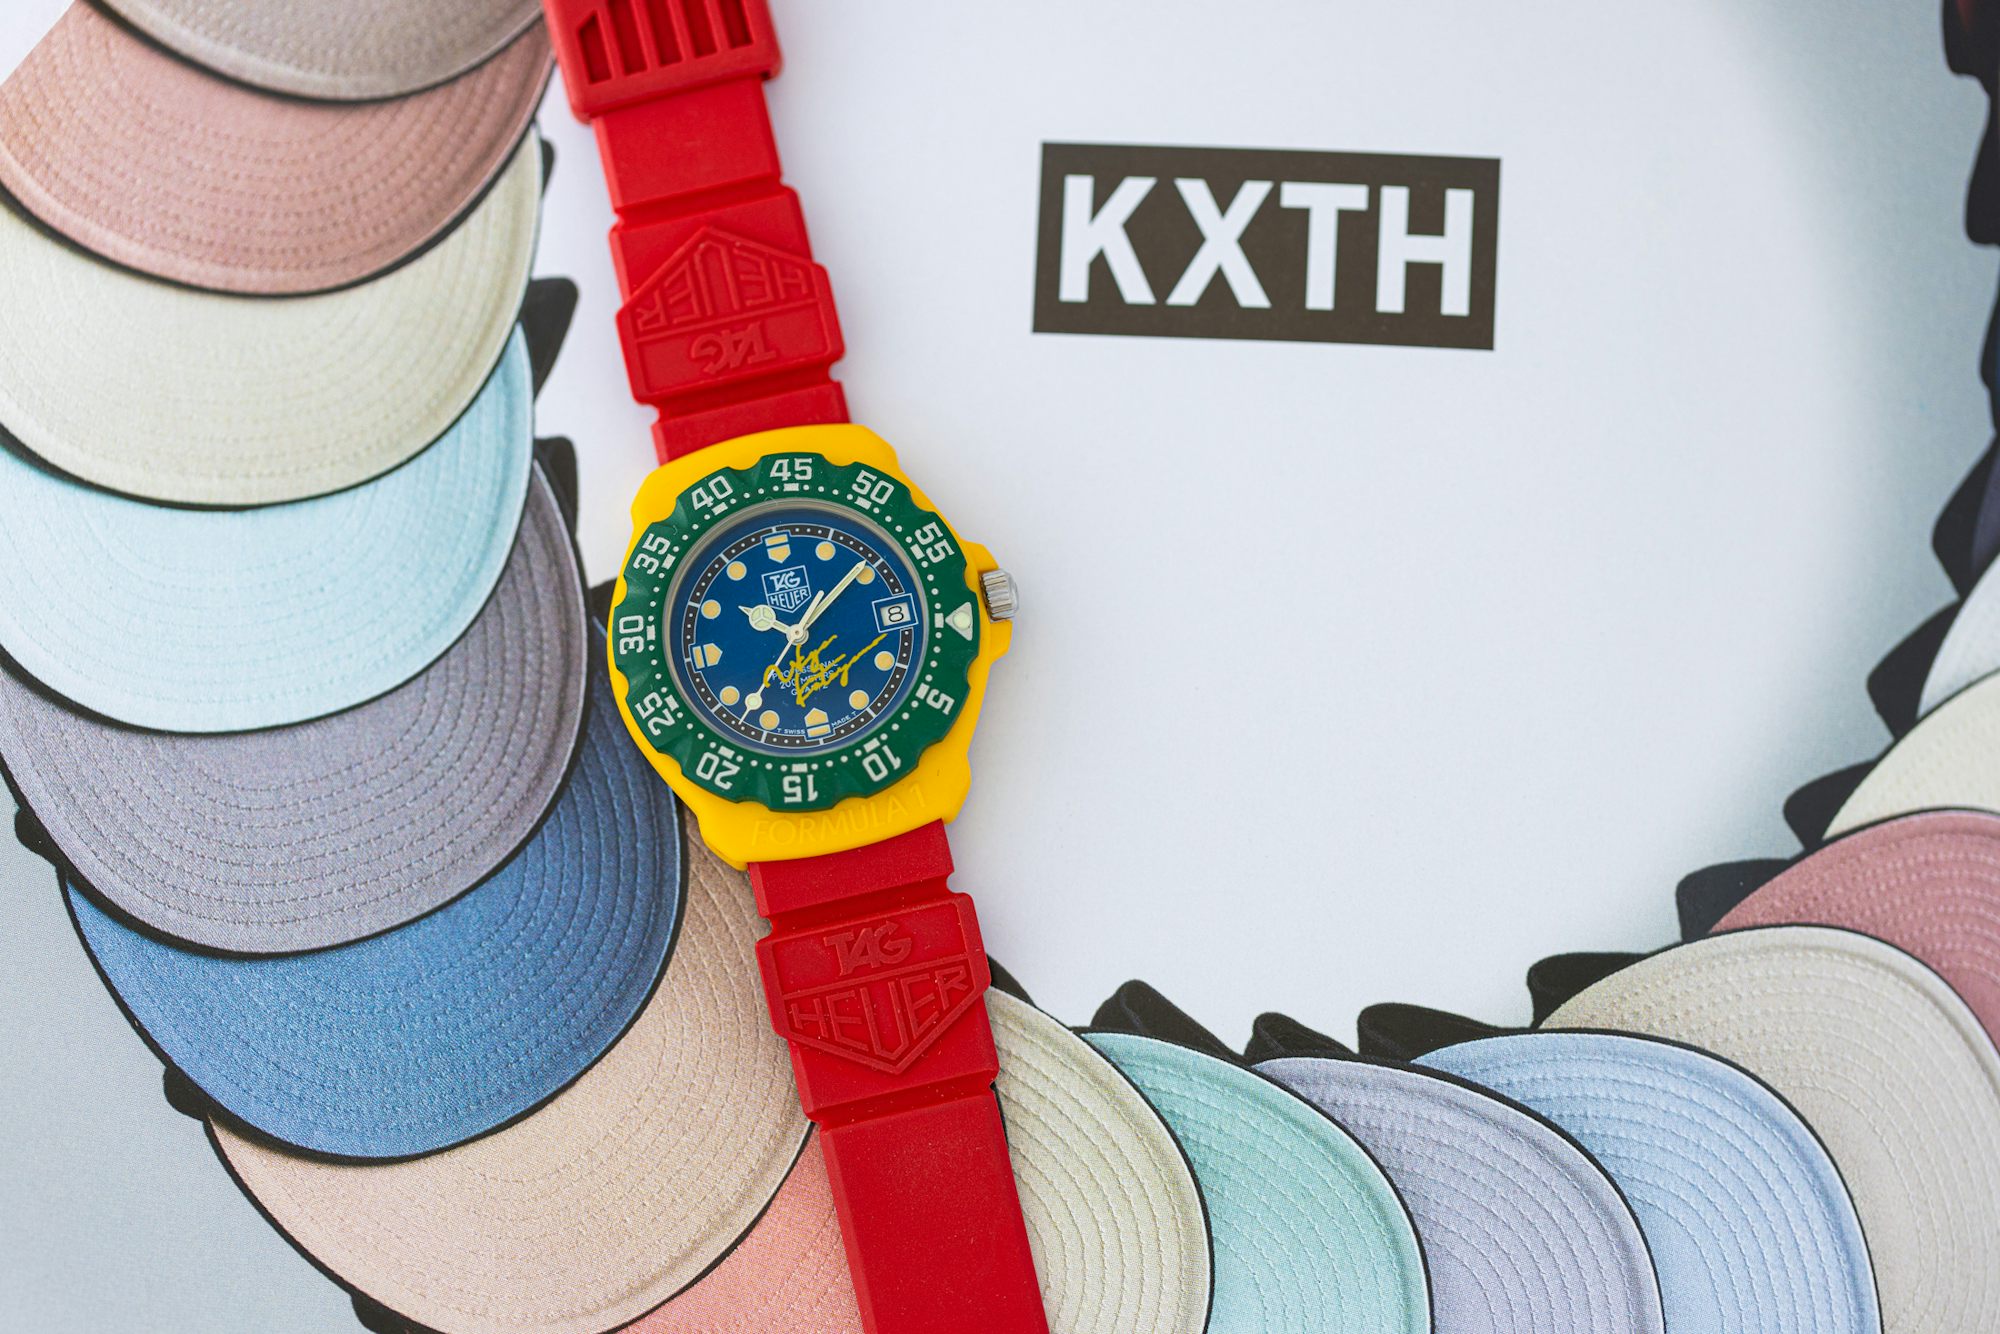 TAG Formula One watch featuring the signature of Ukyo Katayama on a background with the text "KXTH"